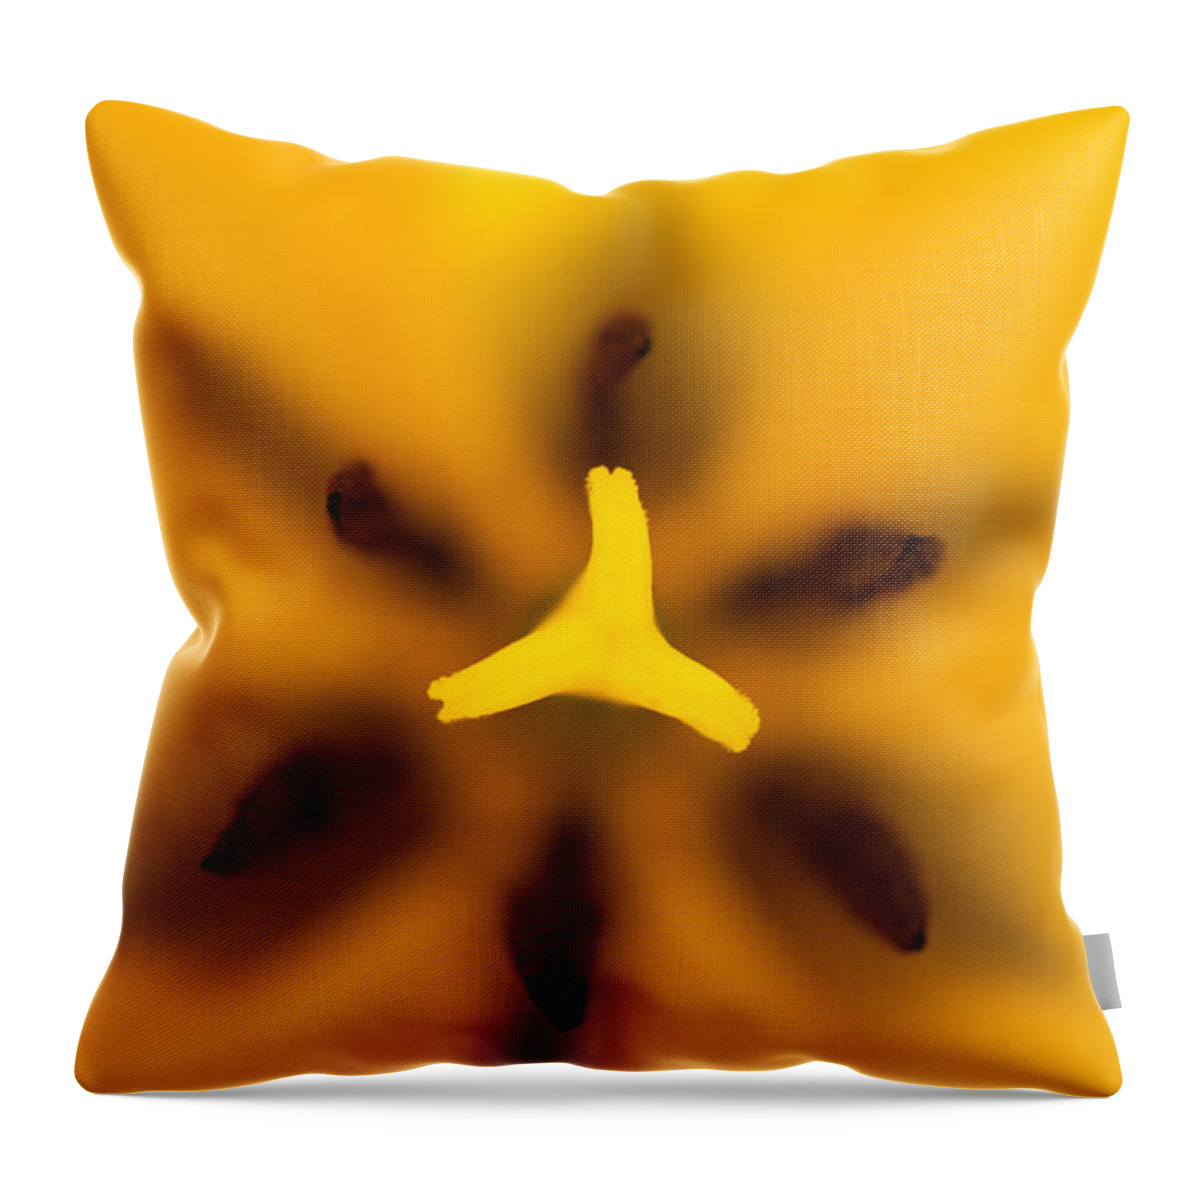 Tulip Throw Pillow featuring the photograph Yellow Tulip by Sebastian Musial